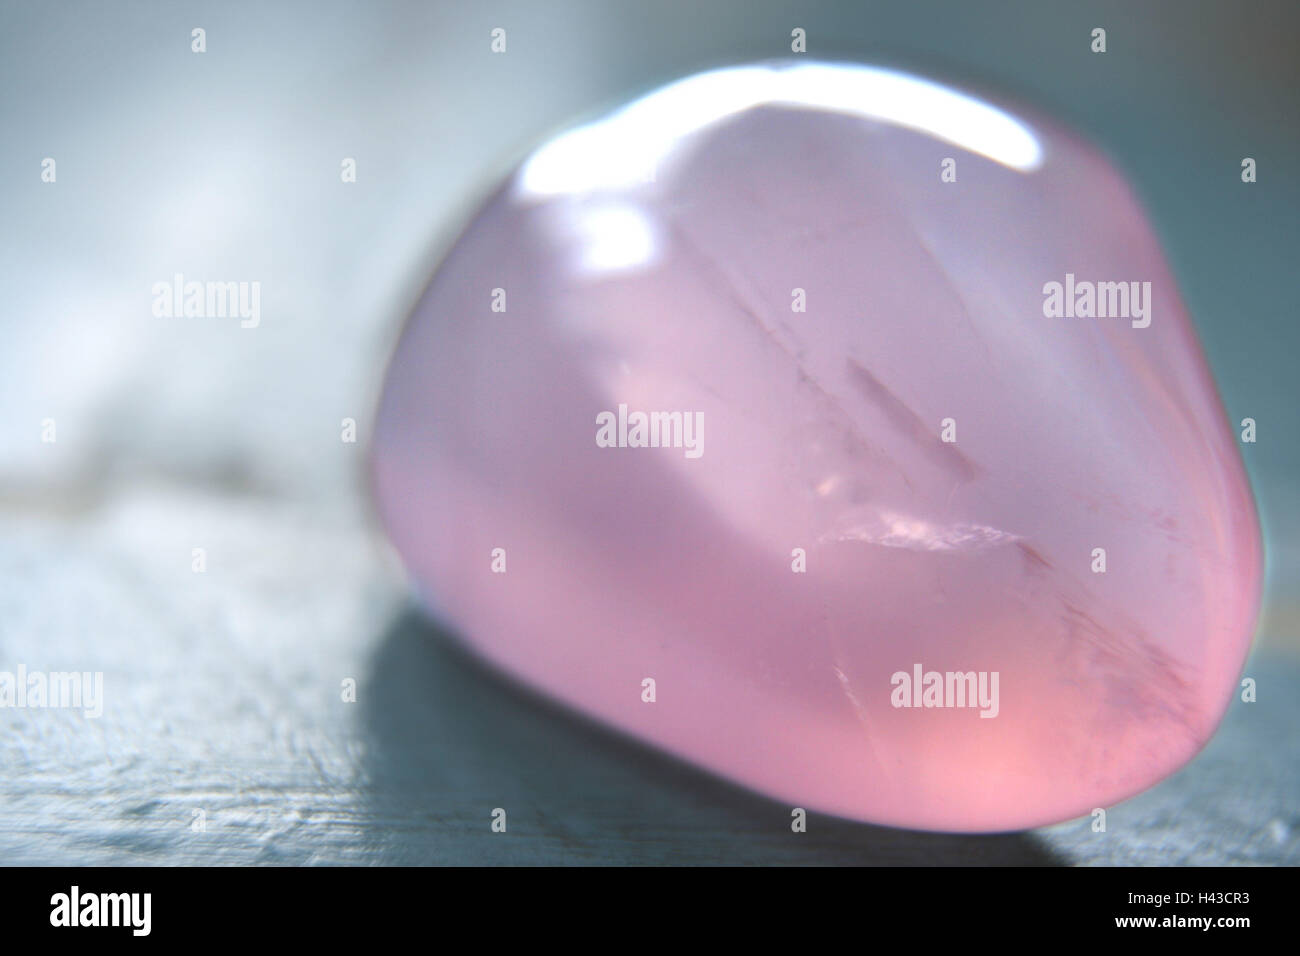 Rose Quartz High Resolution Stock Photography and Images - Alamy